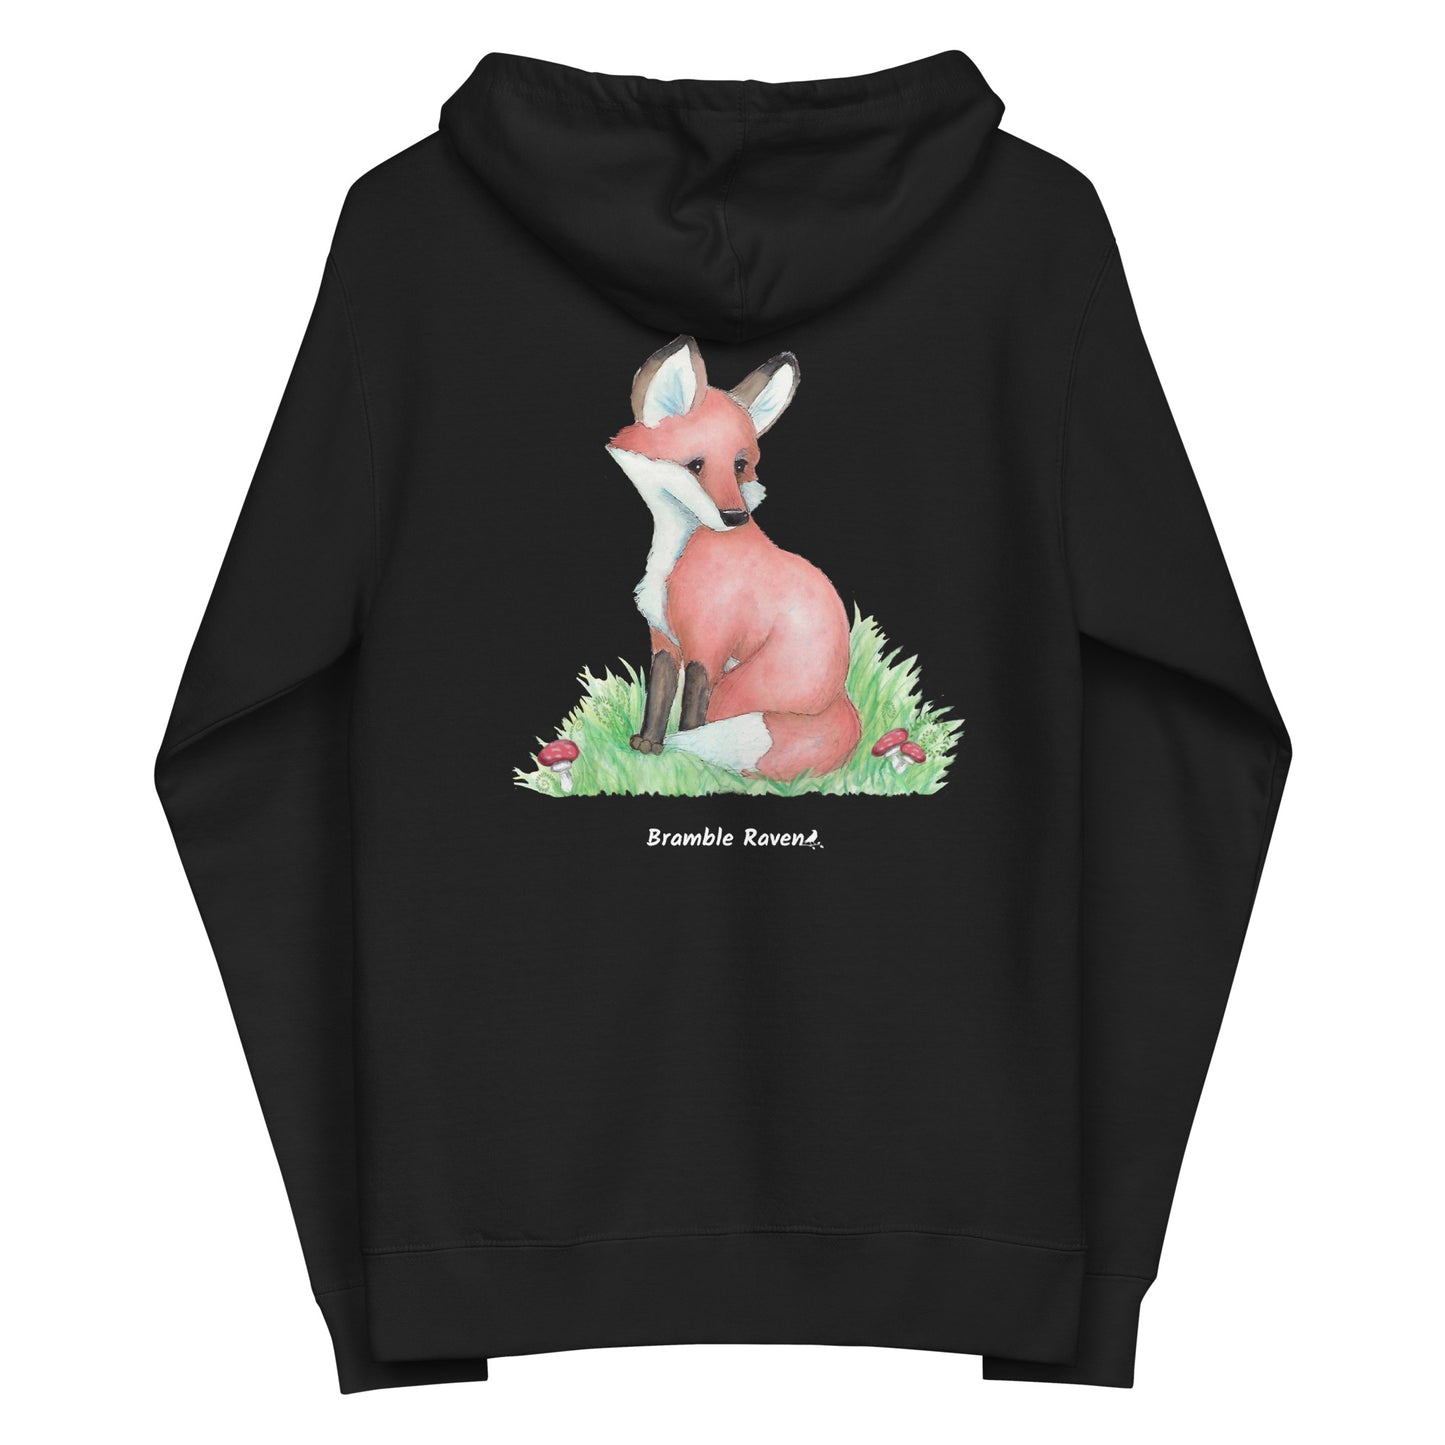 Black colored unisex fleece zip up hoodie. Back design features a watercolor fox in the grass with ferns and mushrooms. Has a jersey-lined hood, metal eyelets and zipper.